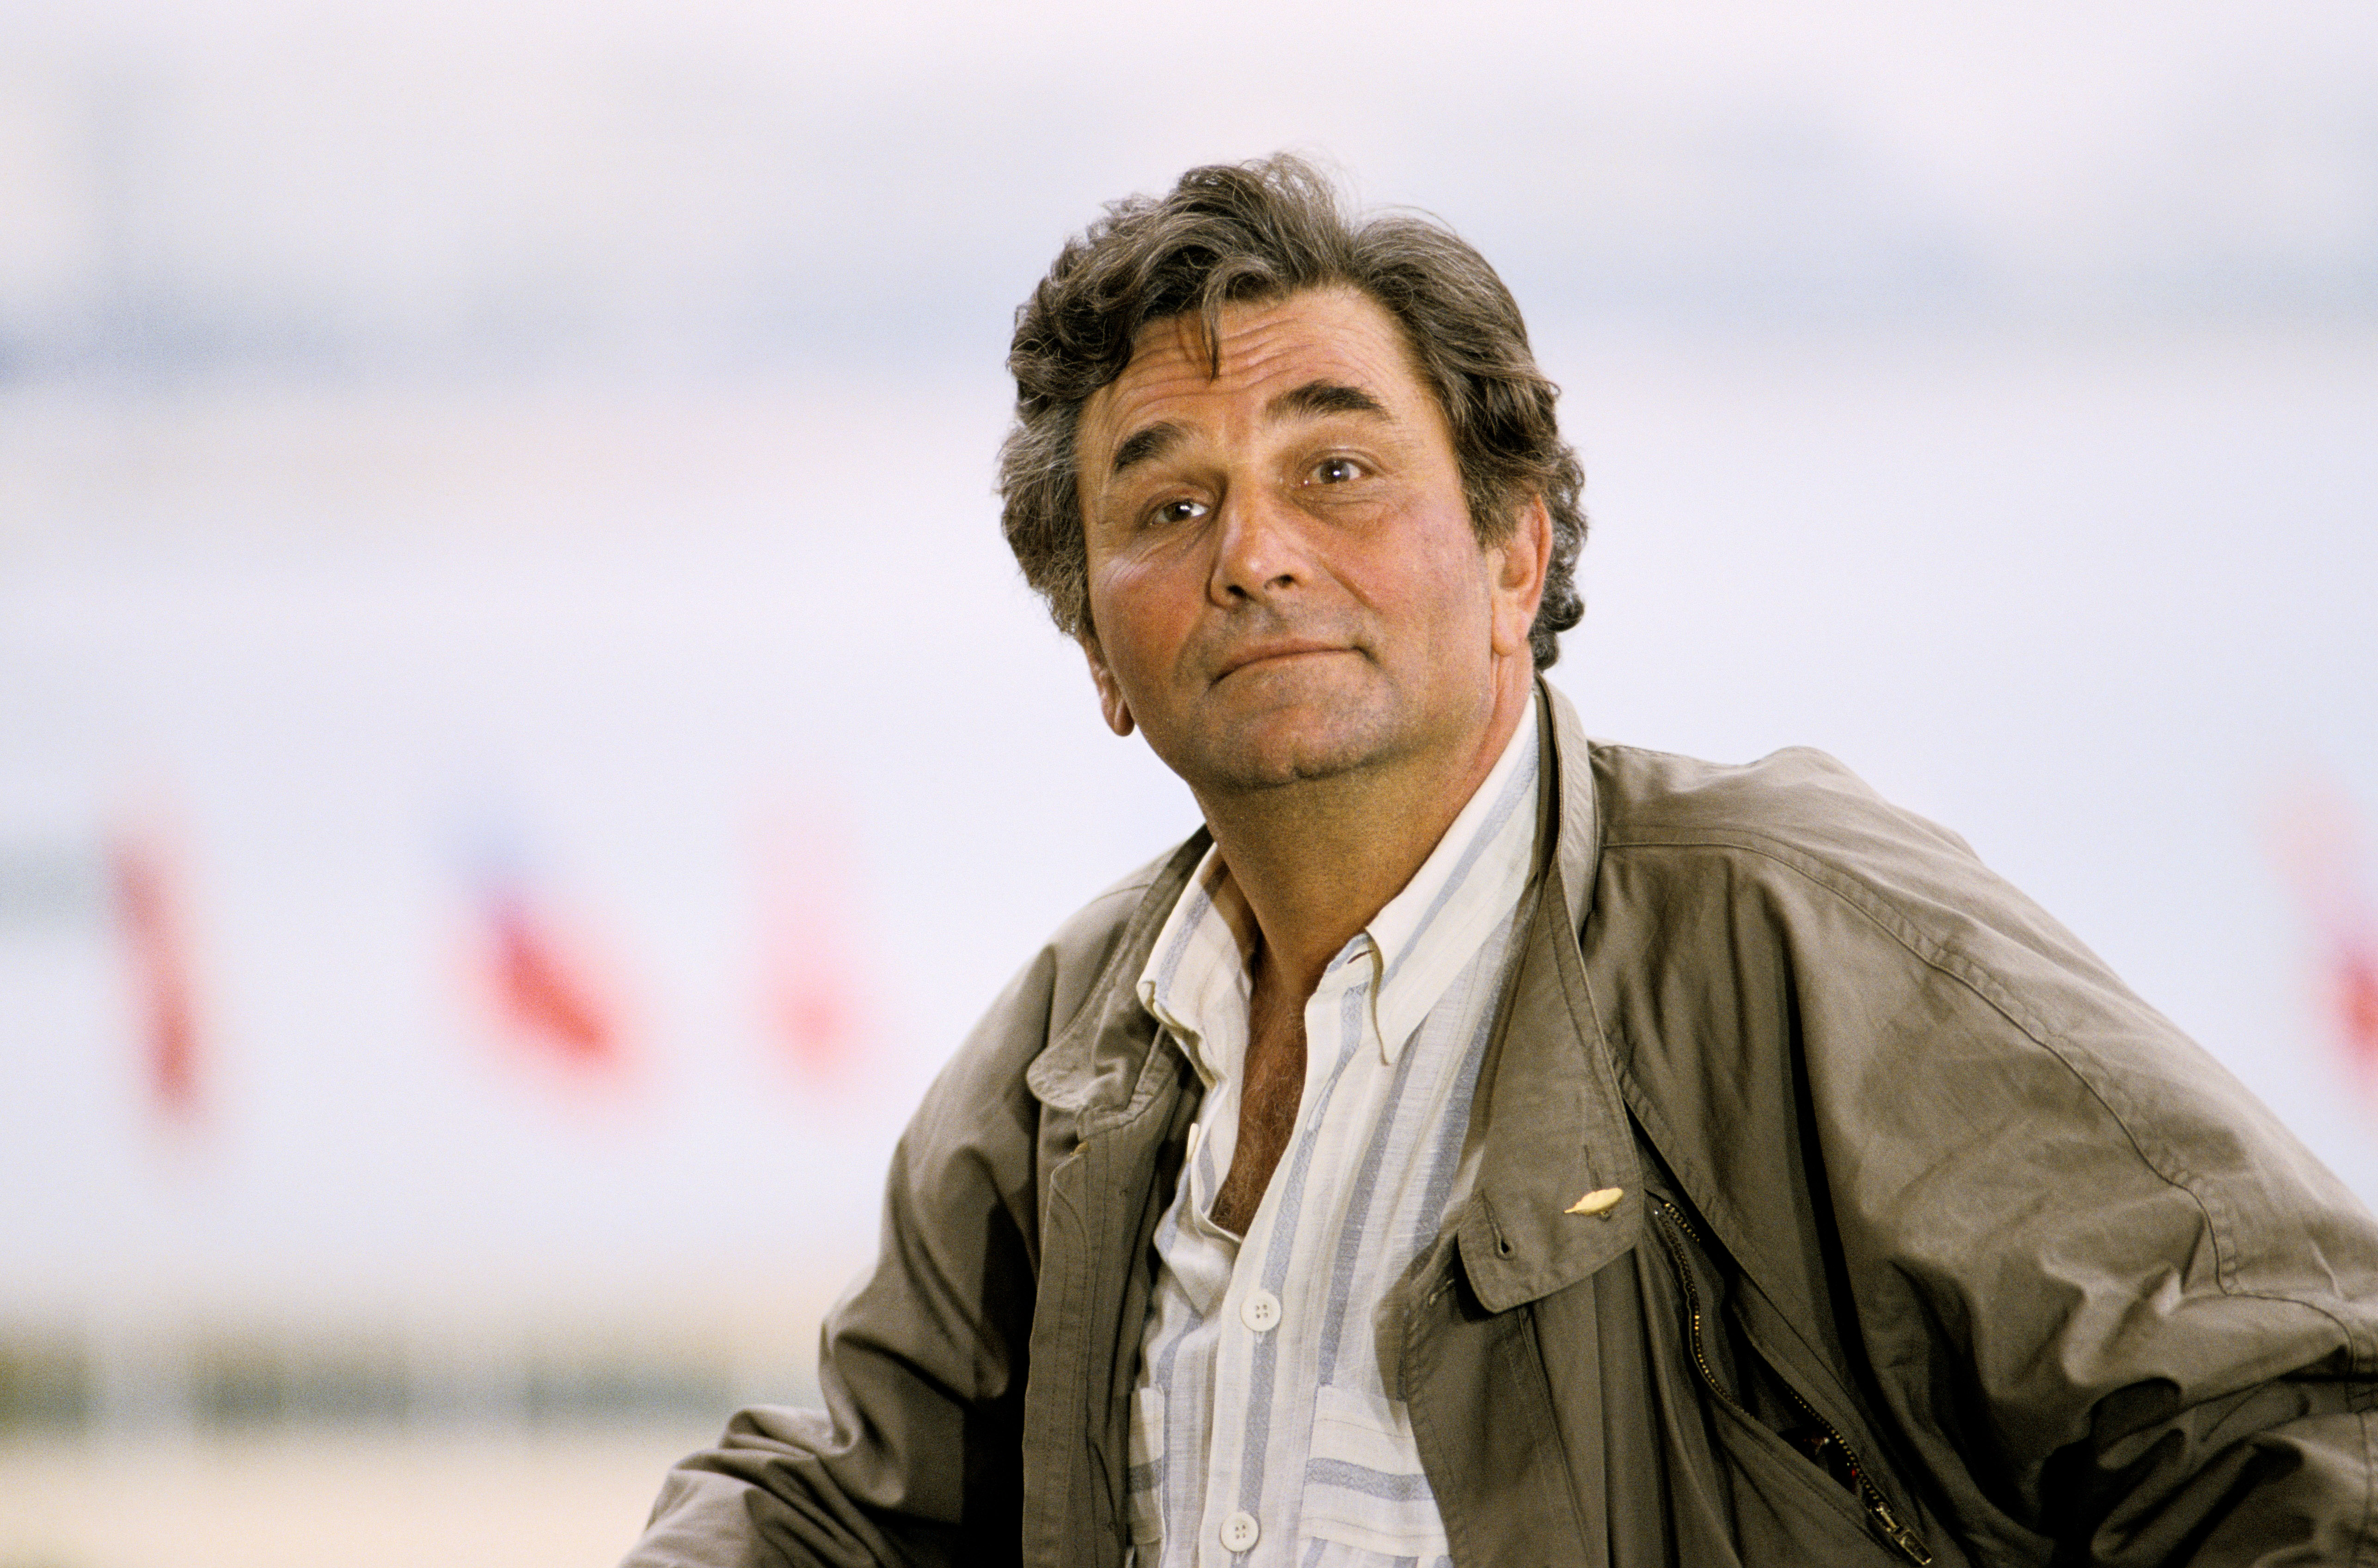 Peter Falk during the Cannes Film Festival in May 1987, in Cannes, France. | Source: Getty Images